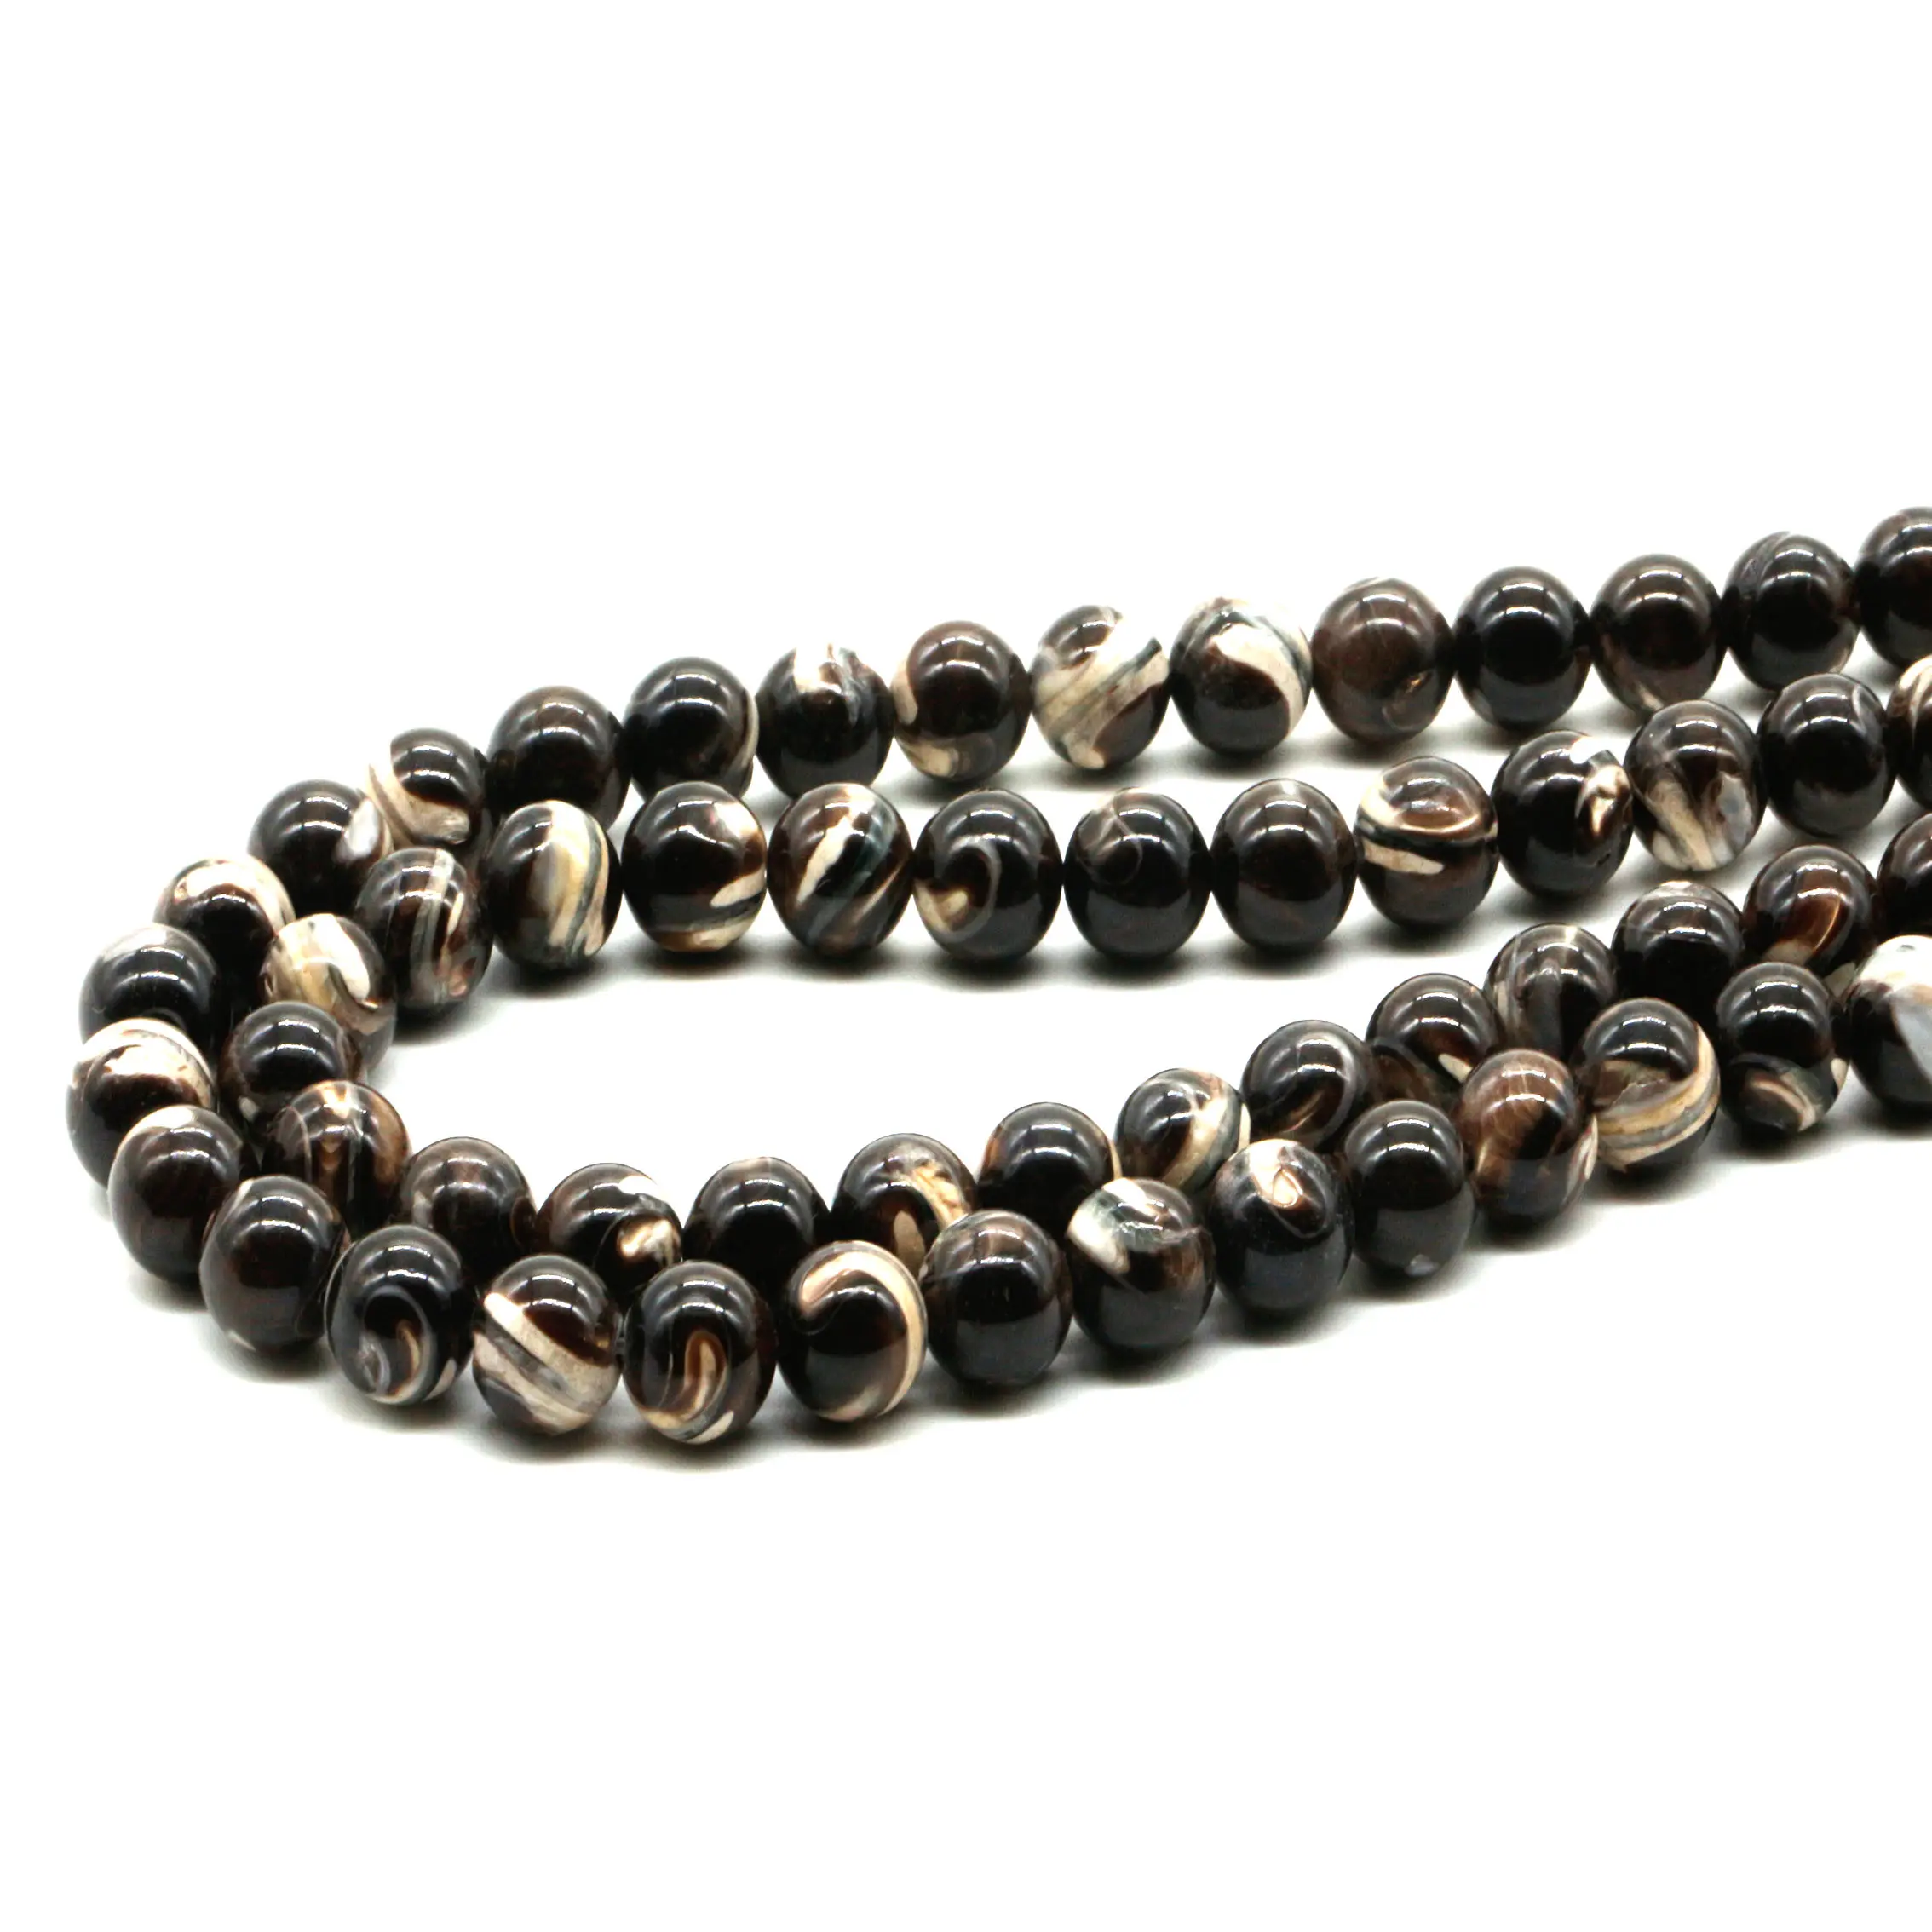 6mm black mother of pearl beads fashion unique loose gemstone mother of pearl jewelry for making bracelets necklaces